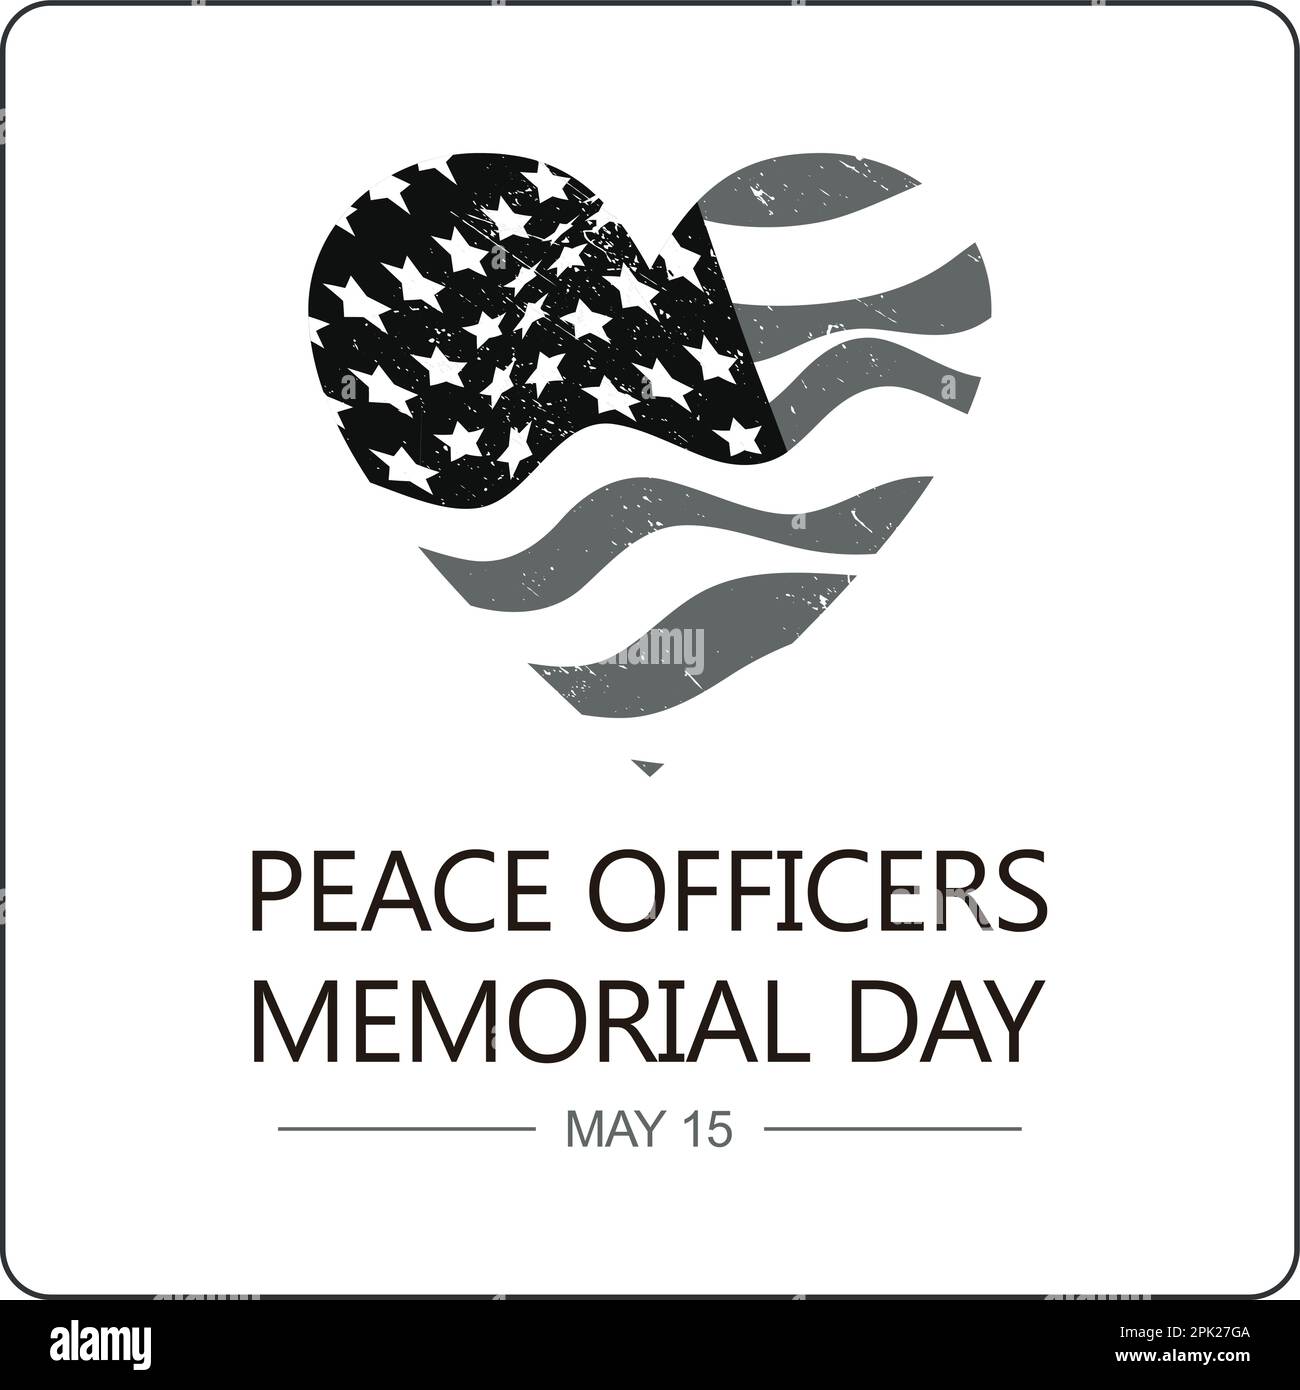 Peace Officers Memorial Day 15 may, pays tribute to the local, state, and federal officers who have died or disabled, in the line of duty, background Stock Vector